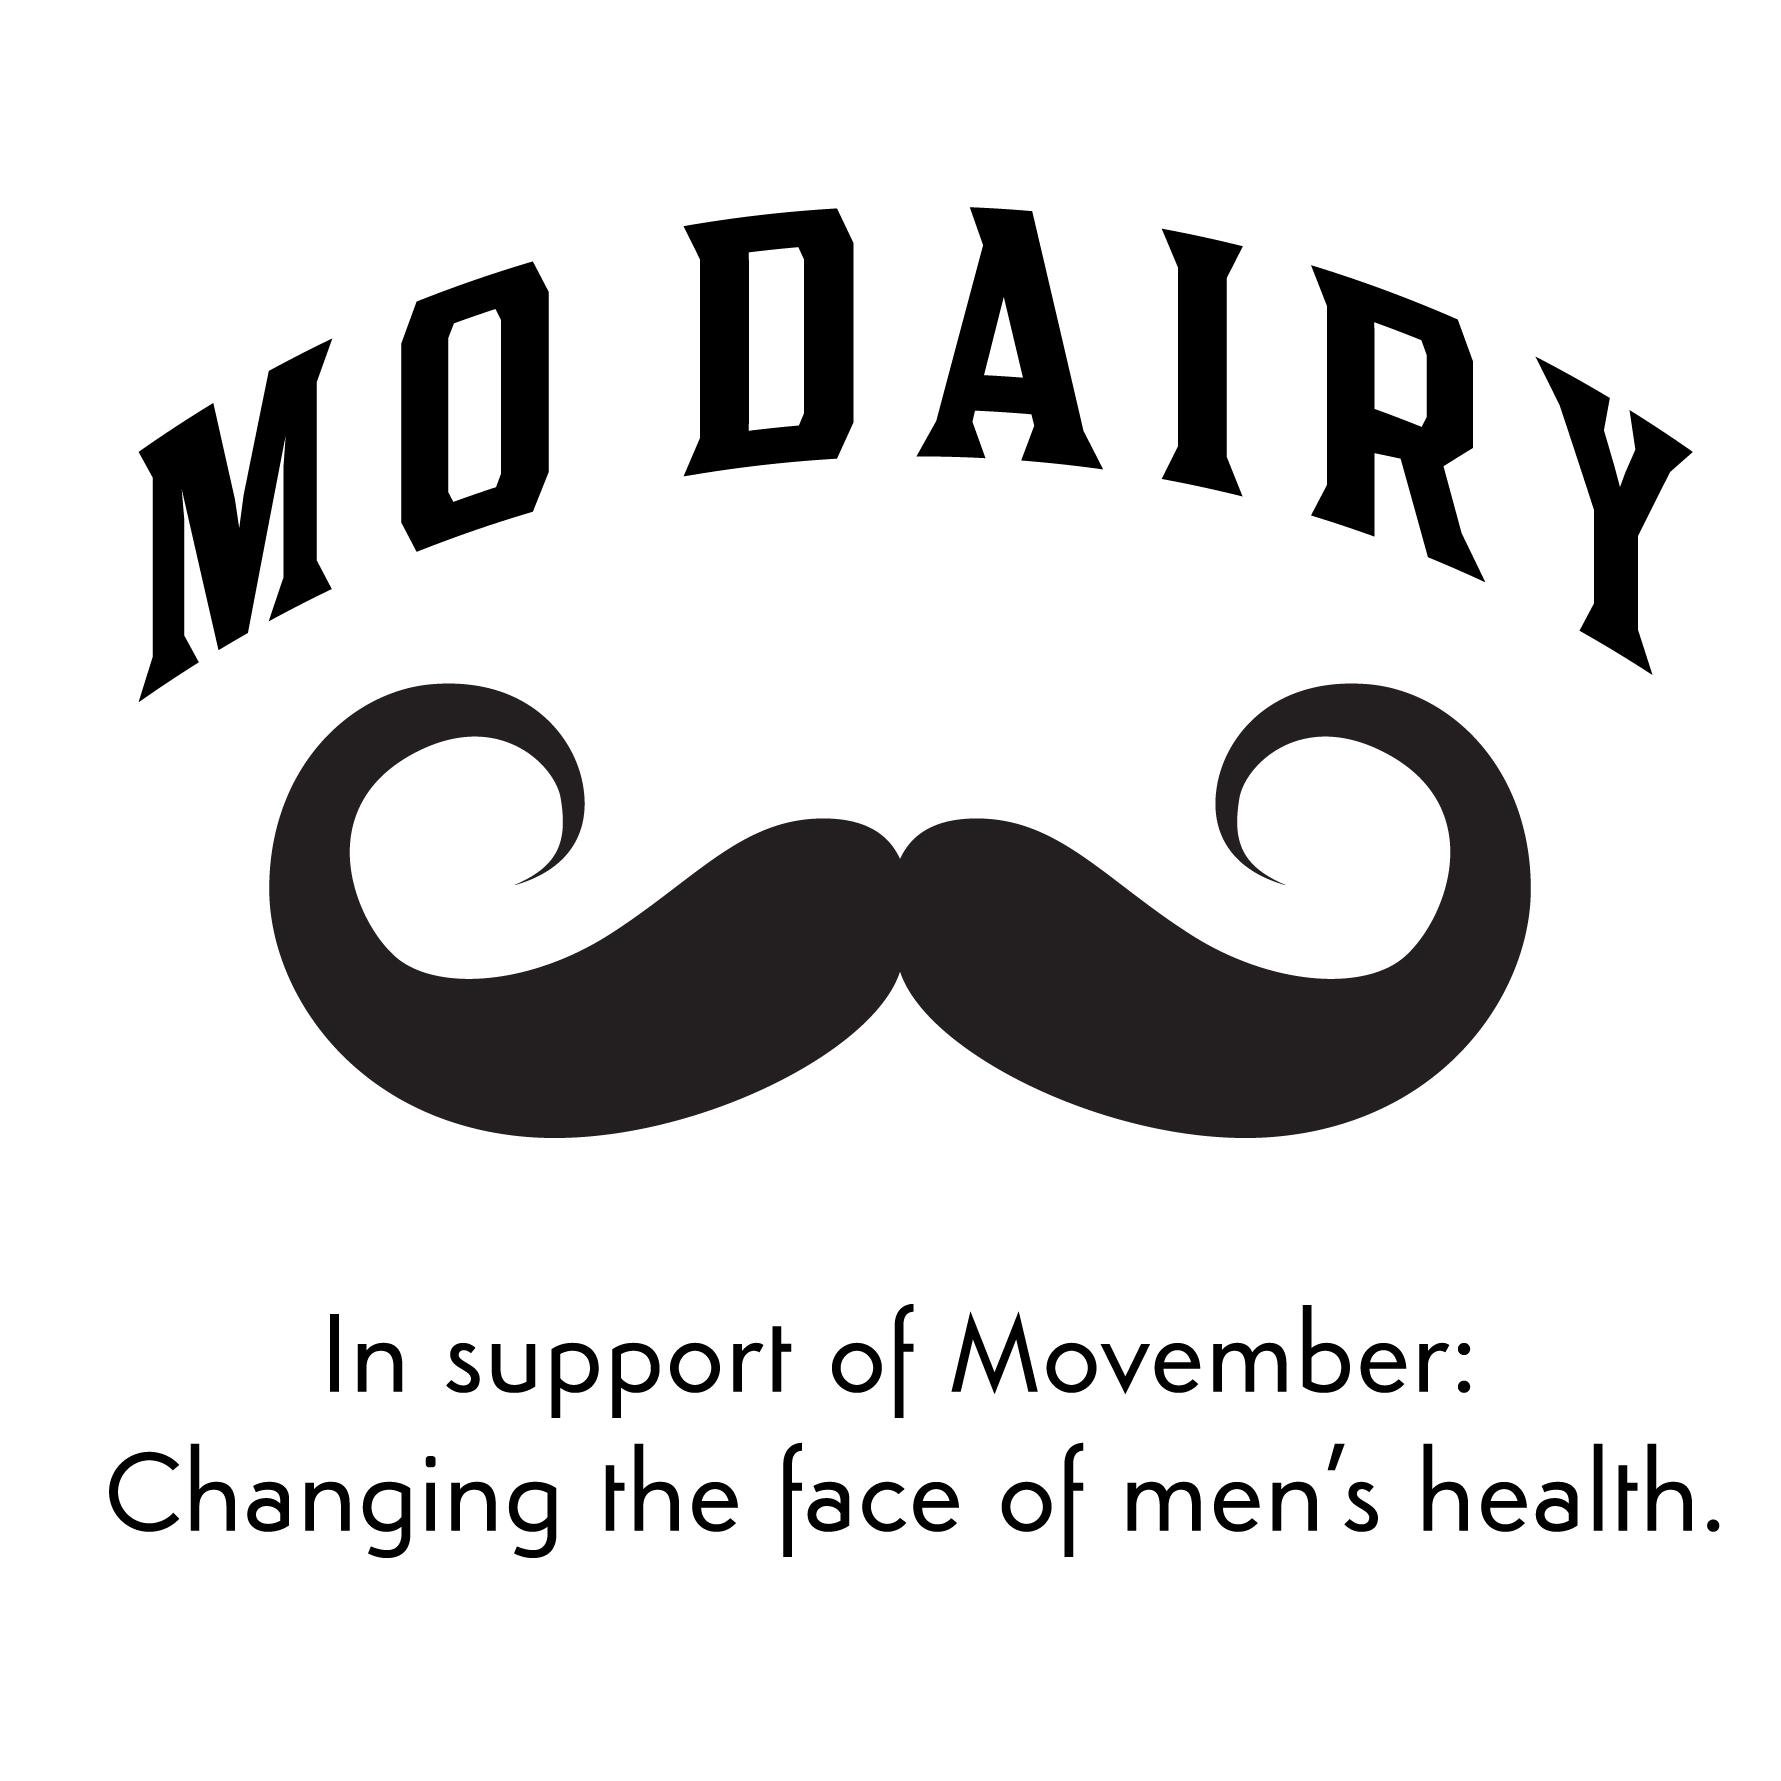 What's better than a moustache? A milk moustache. Encouraging the dairy industry to join @Movember and change the face of men's health.